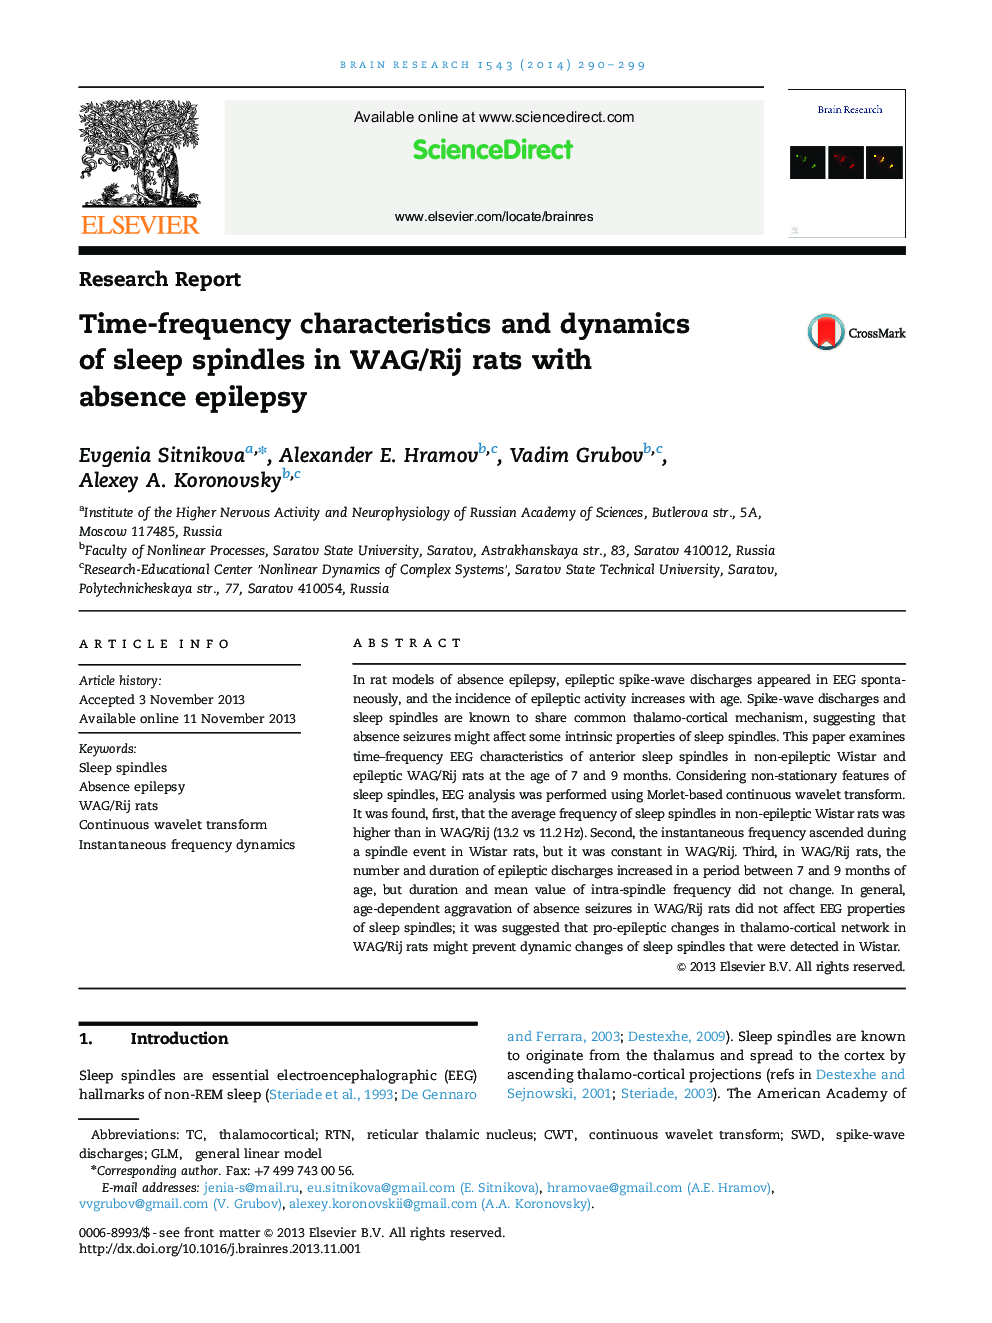 Research ReportTime-frequency characteristics and dynamics of sleep spindles in WAG/Rij rats with absence epilepsy